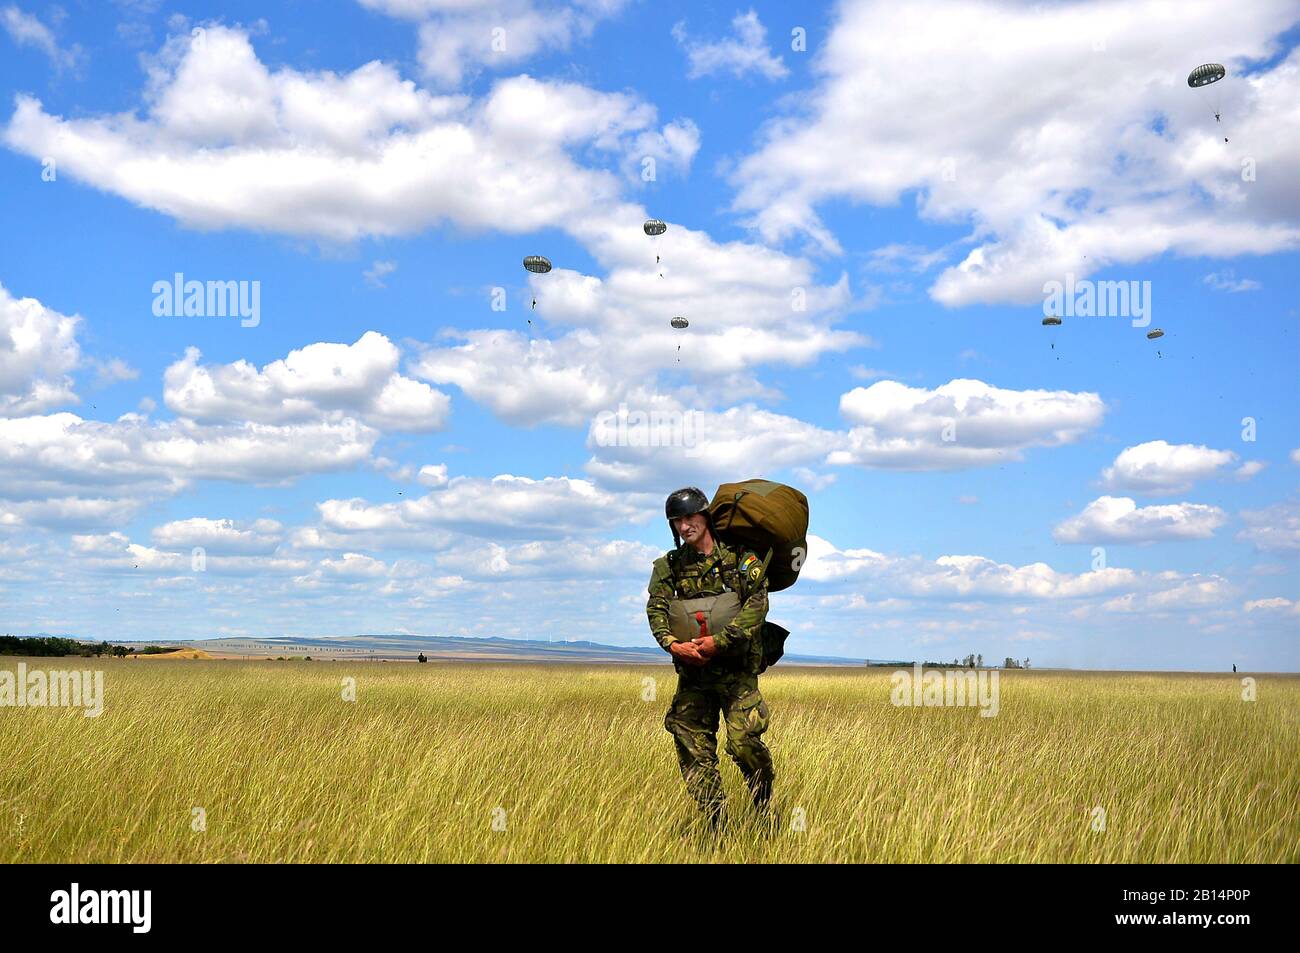 A Romanian paratrooper hikes back to his pick-up point after jumping from a U.S. Air Force C-130J during a bilateral exercise at Boboc Air Base, Romania, Aug. 24, 2017. Carpathian Fall 2017 showcased the partnership between U.S. and Romanian forces, and involved airdrops of cargo and personnel, tactical evasive maneuvers, and assault landings. (U.S. Air Force photo by Airman 1st Class Joshua Magbanua) Stock Photo